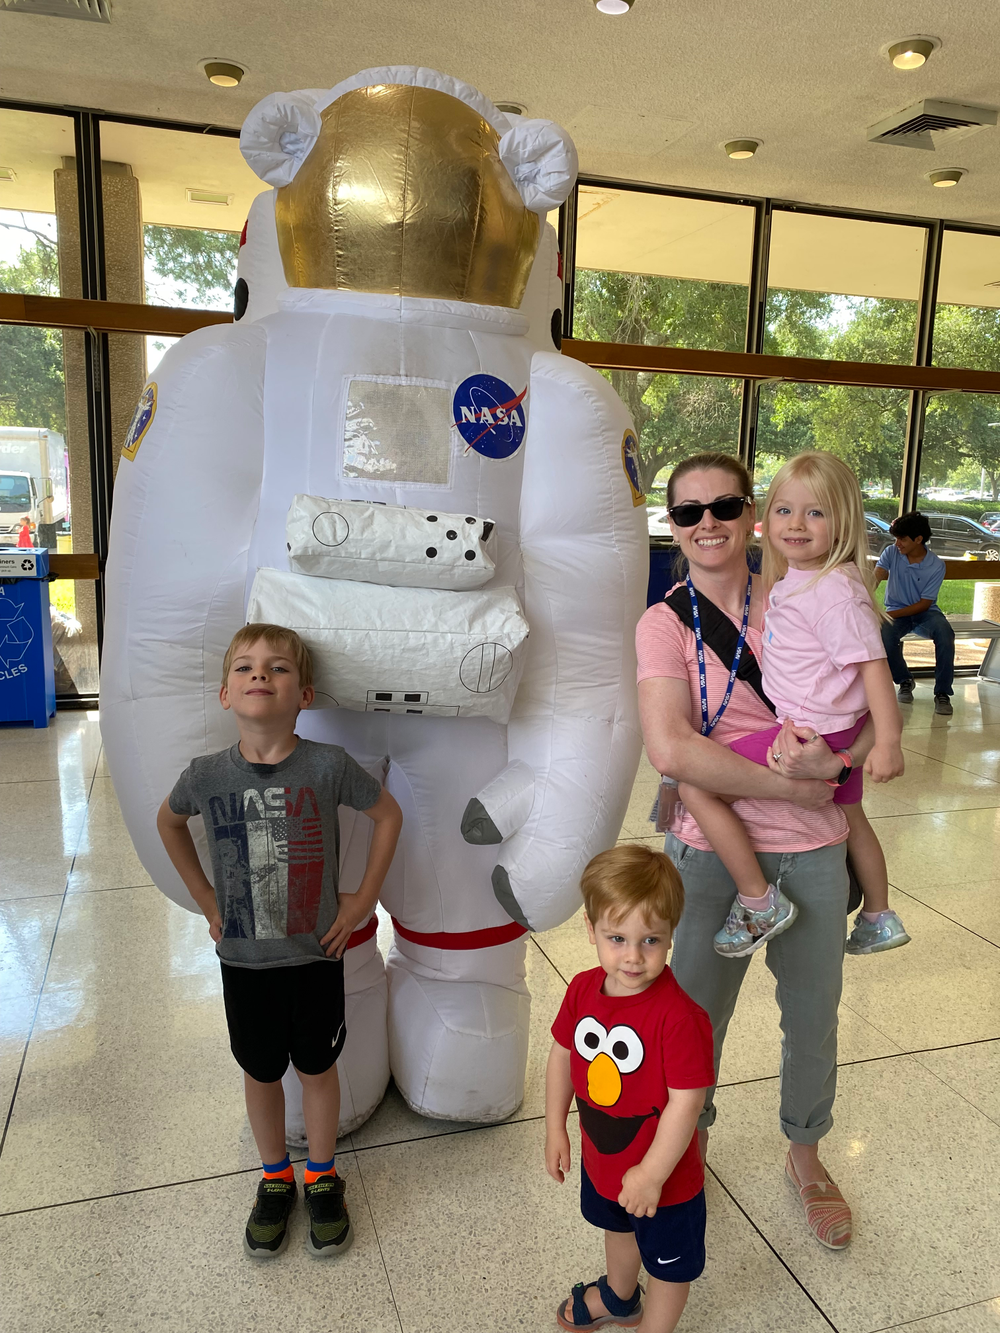 A woman and her three young kids pose with a large blow-up astronaut.